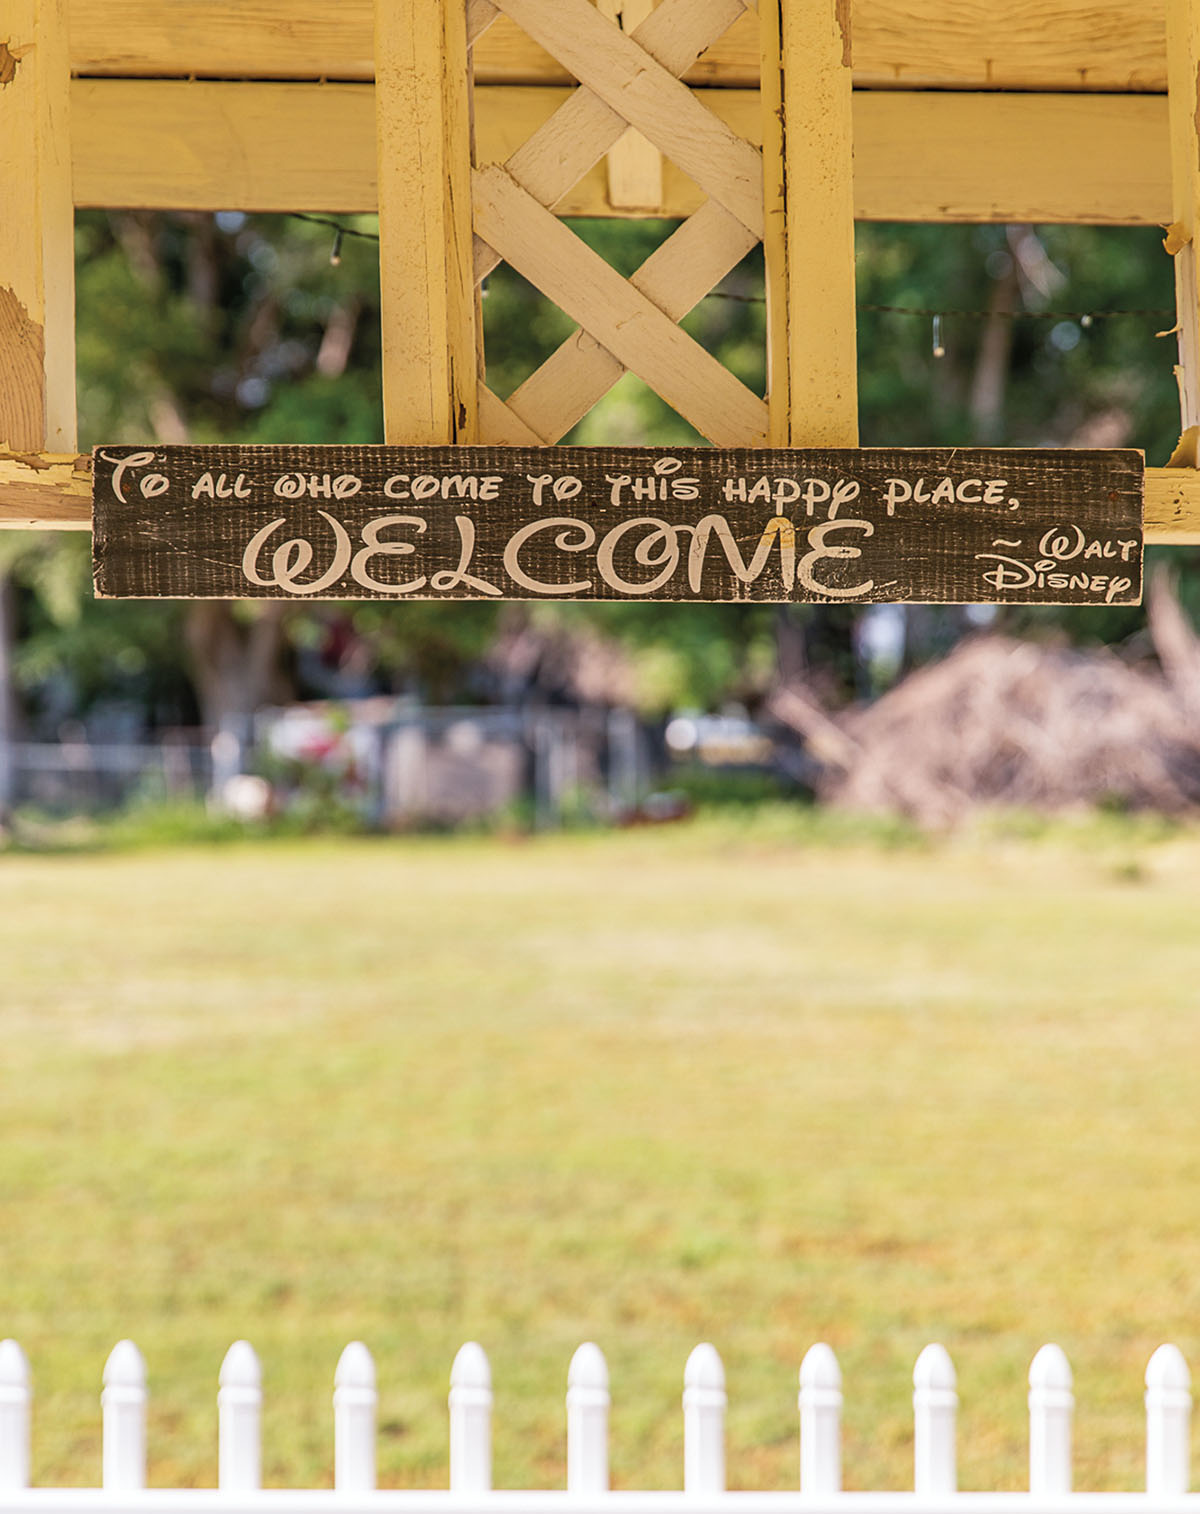 A small wooden sign reading "To All Who Come to this Happy Place, Welcome - Walt Disney"